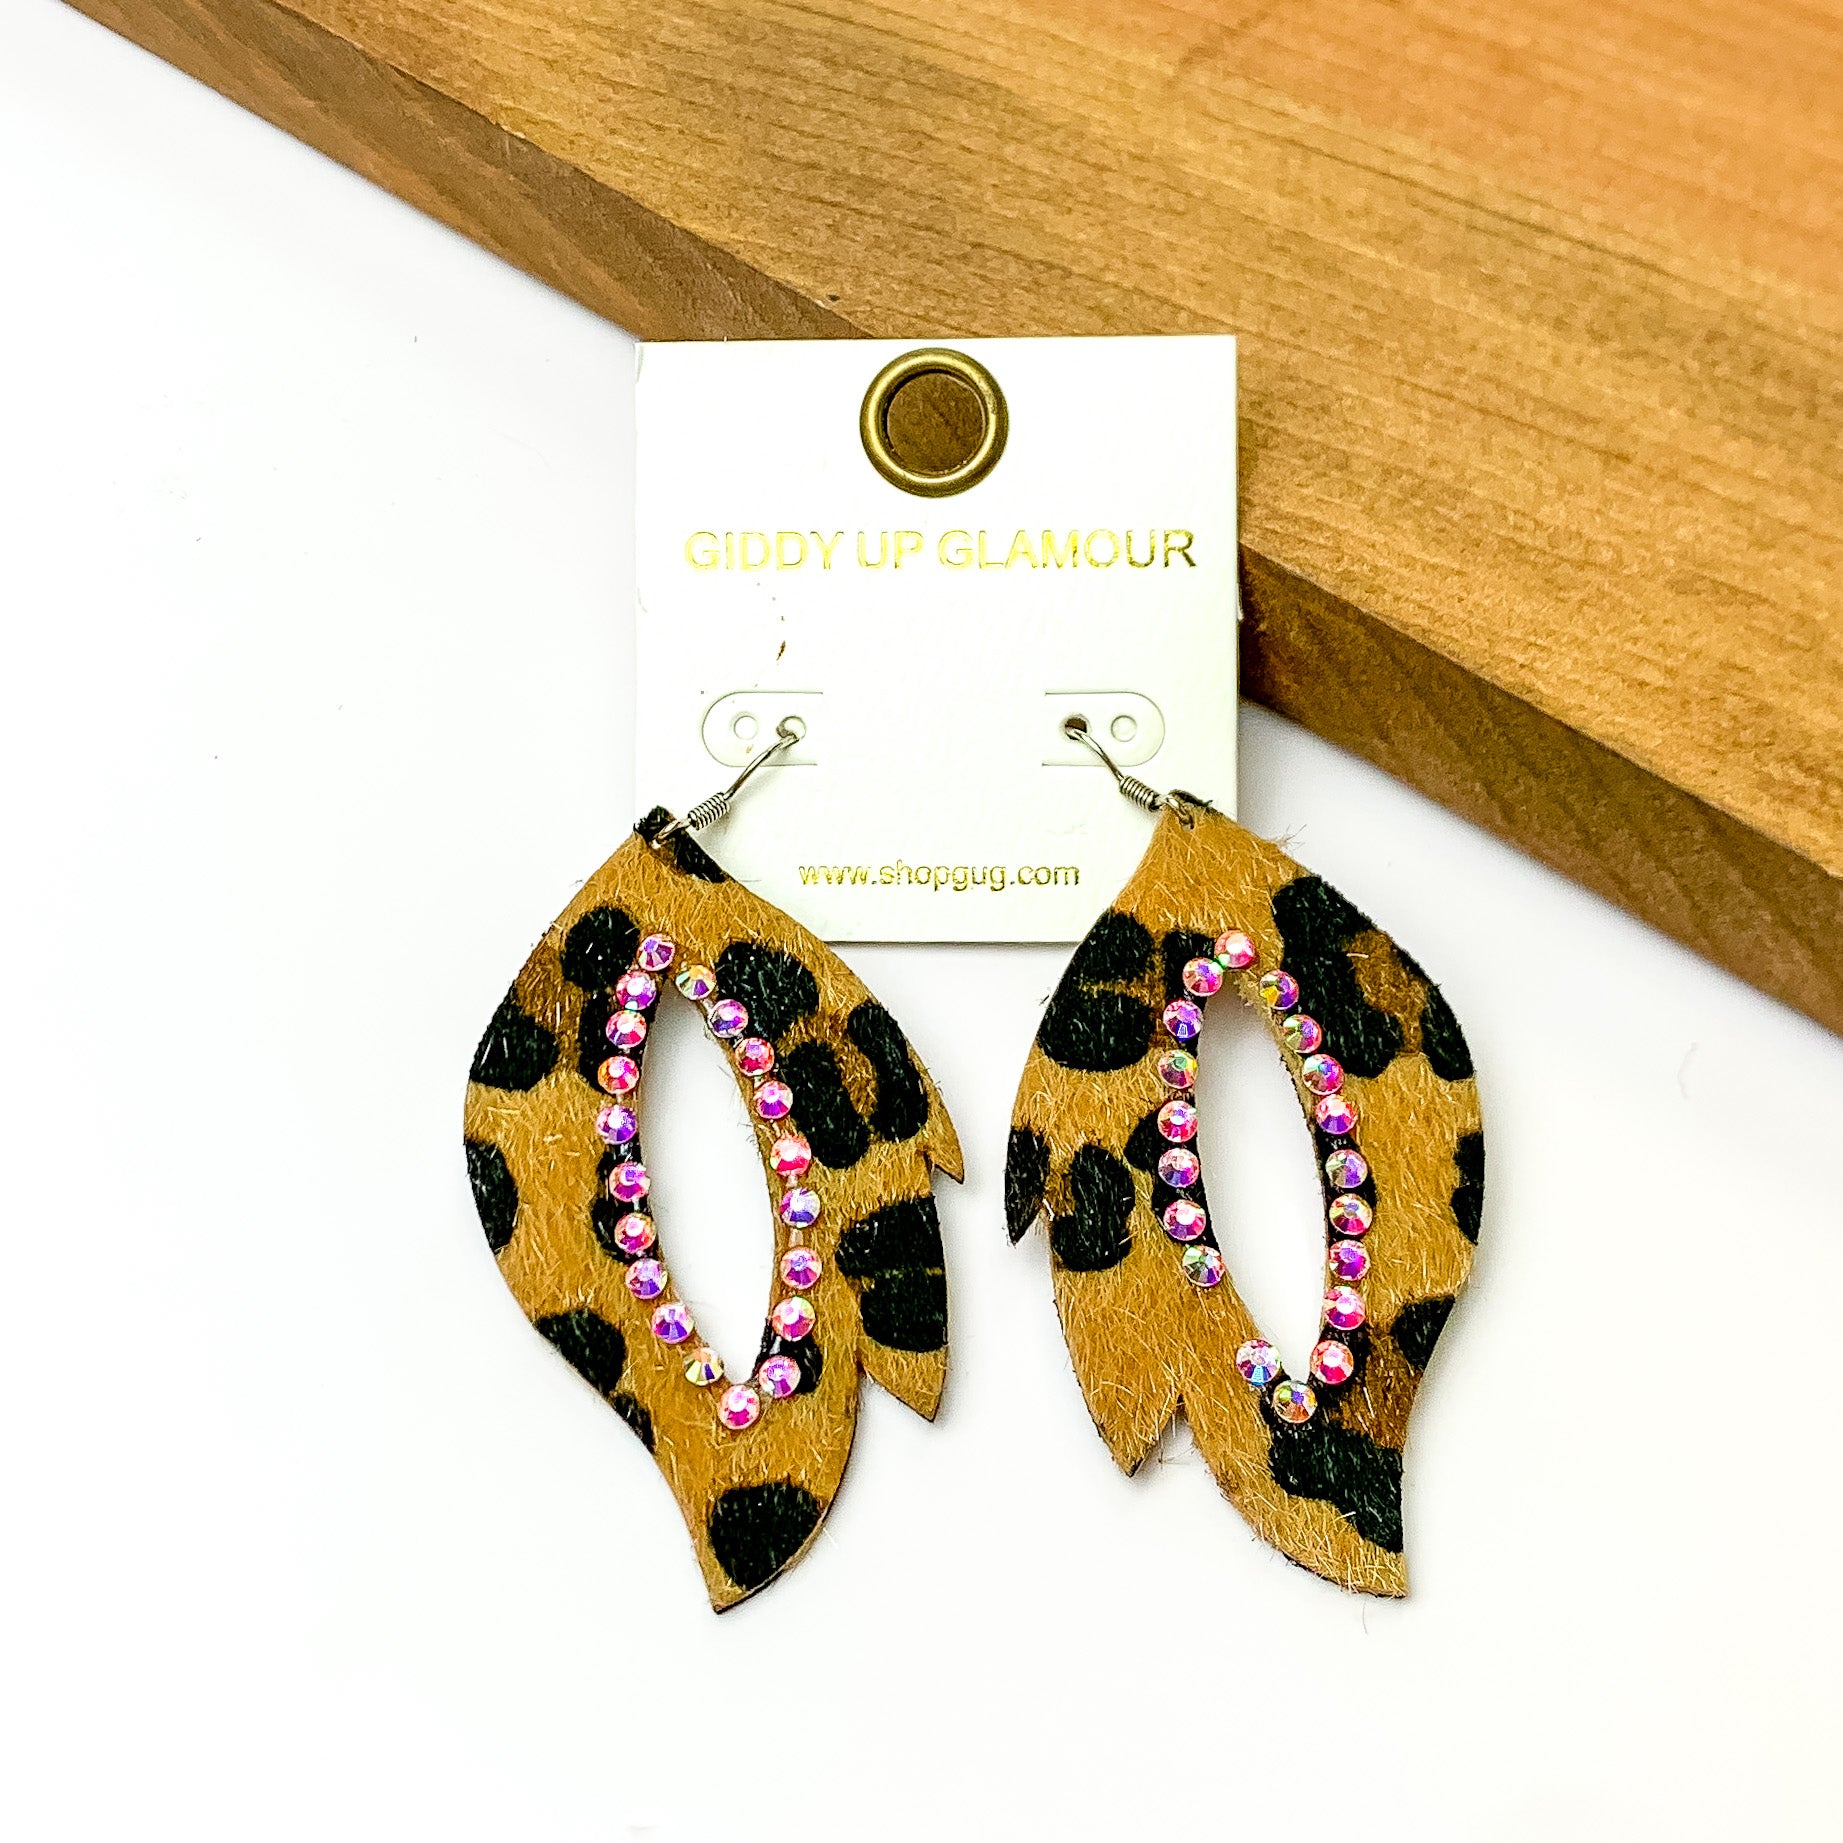 Open drop cheetah print earrings with AB crystals around the inside. Pictured on a white background with a wood piece in the top right corner.